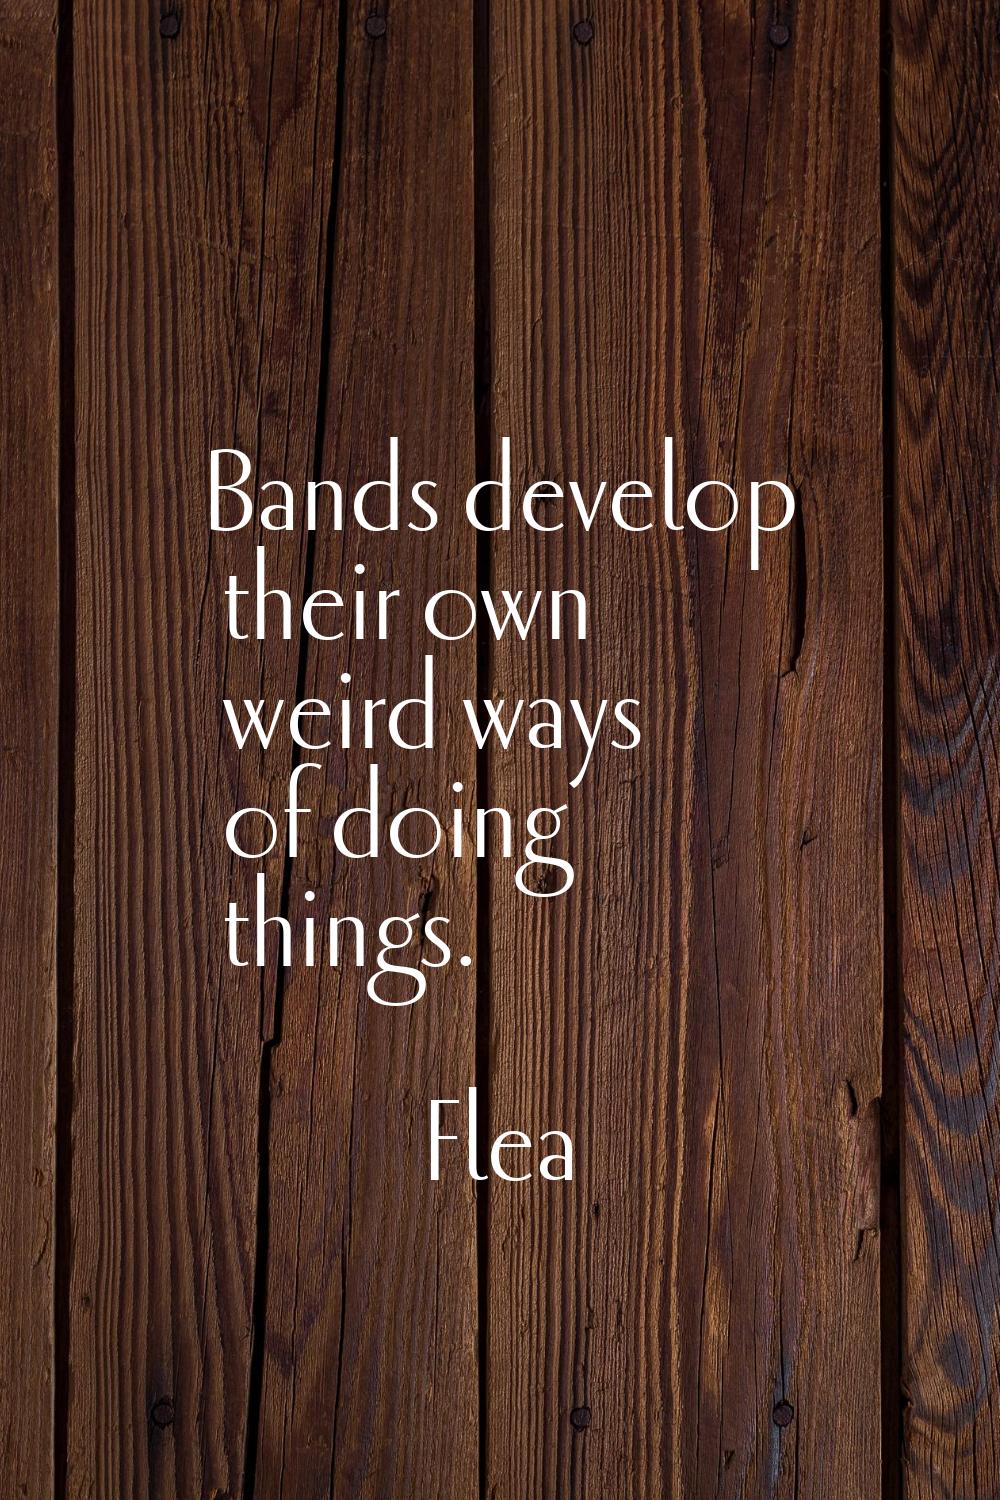 Bands develop their own weird ways of doing things.